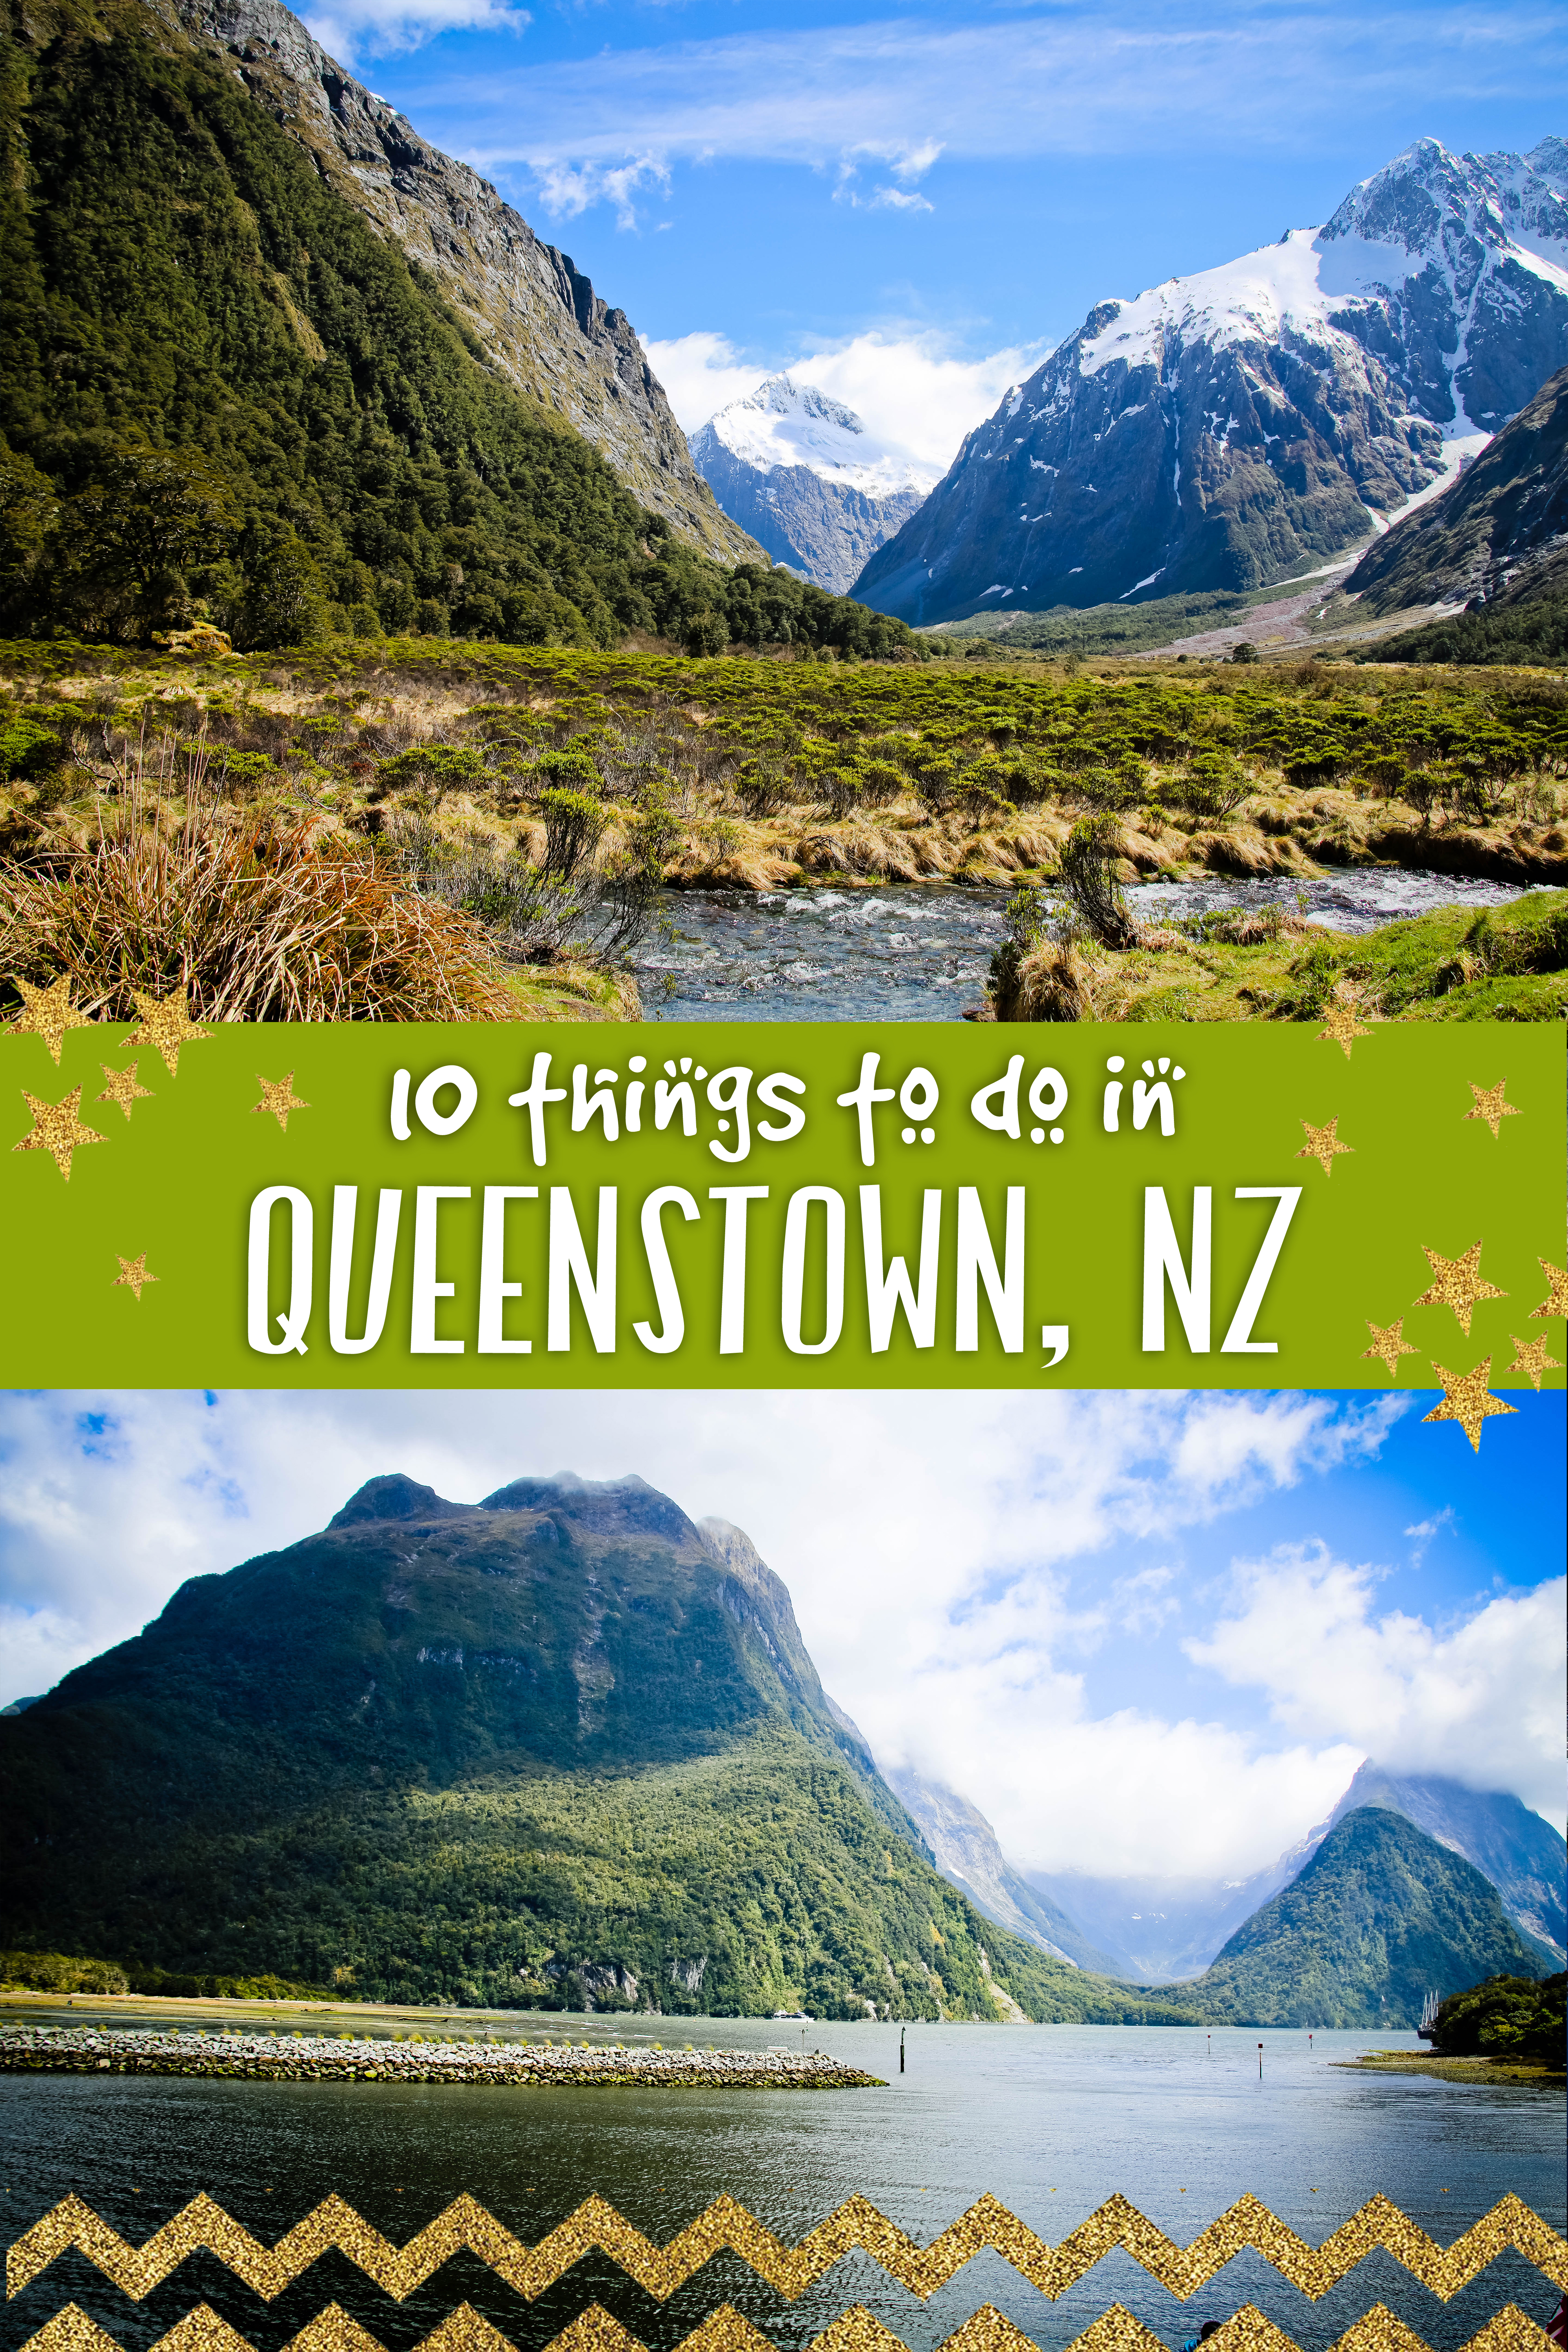 10 Things to do in Queenstown, New Zealand